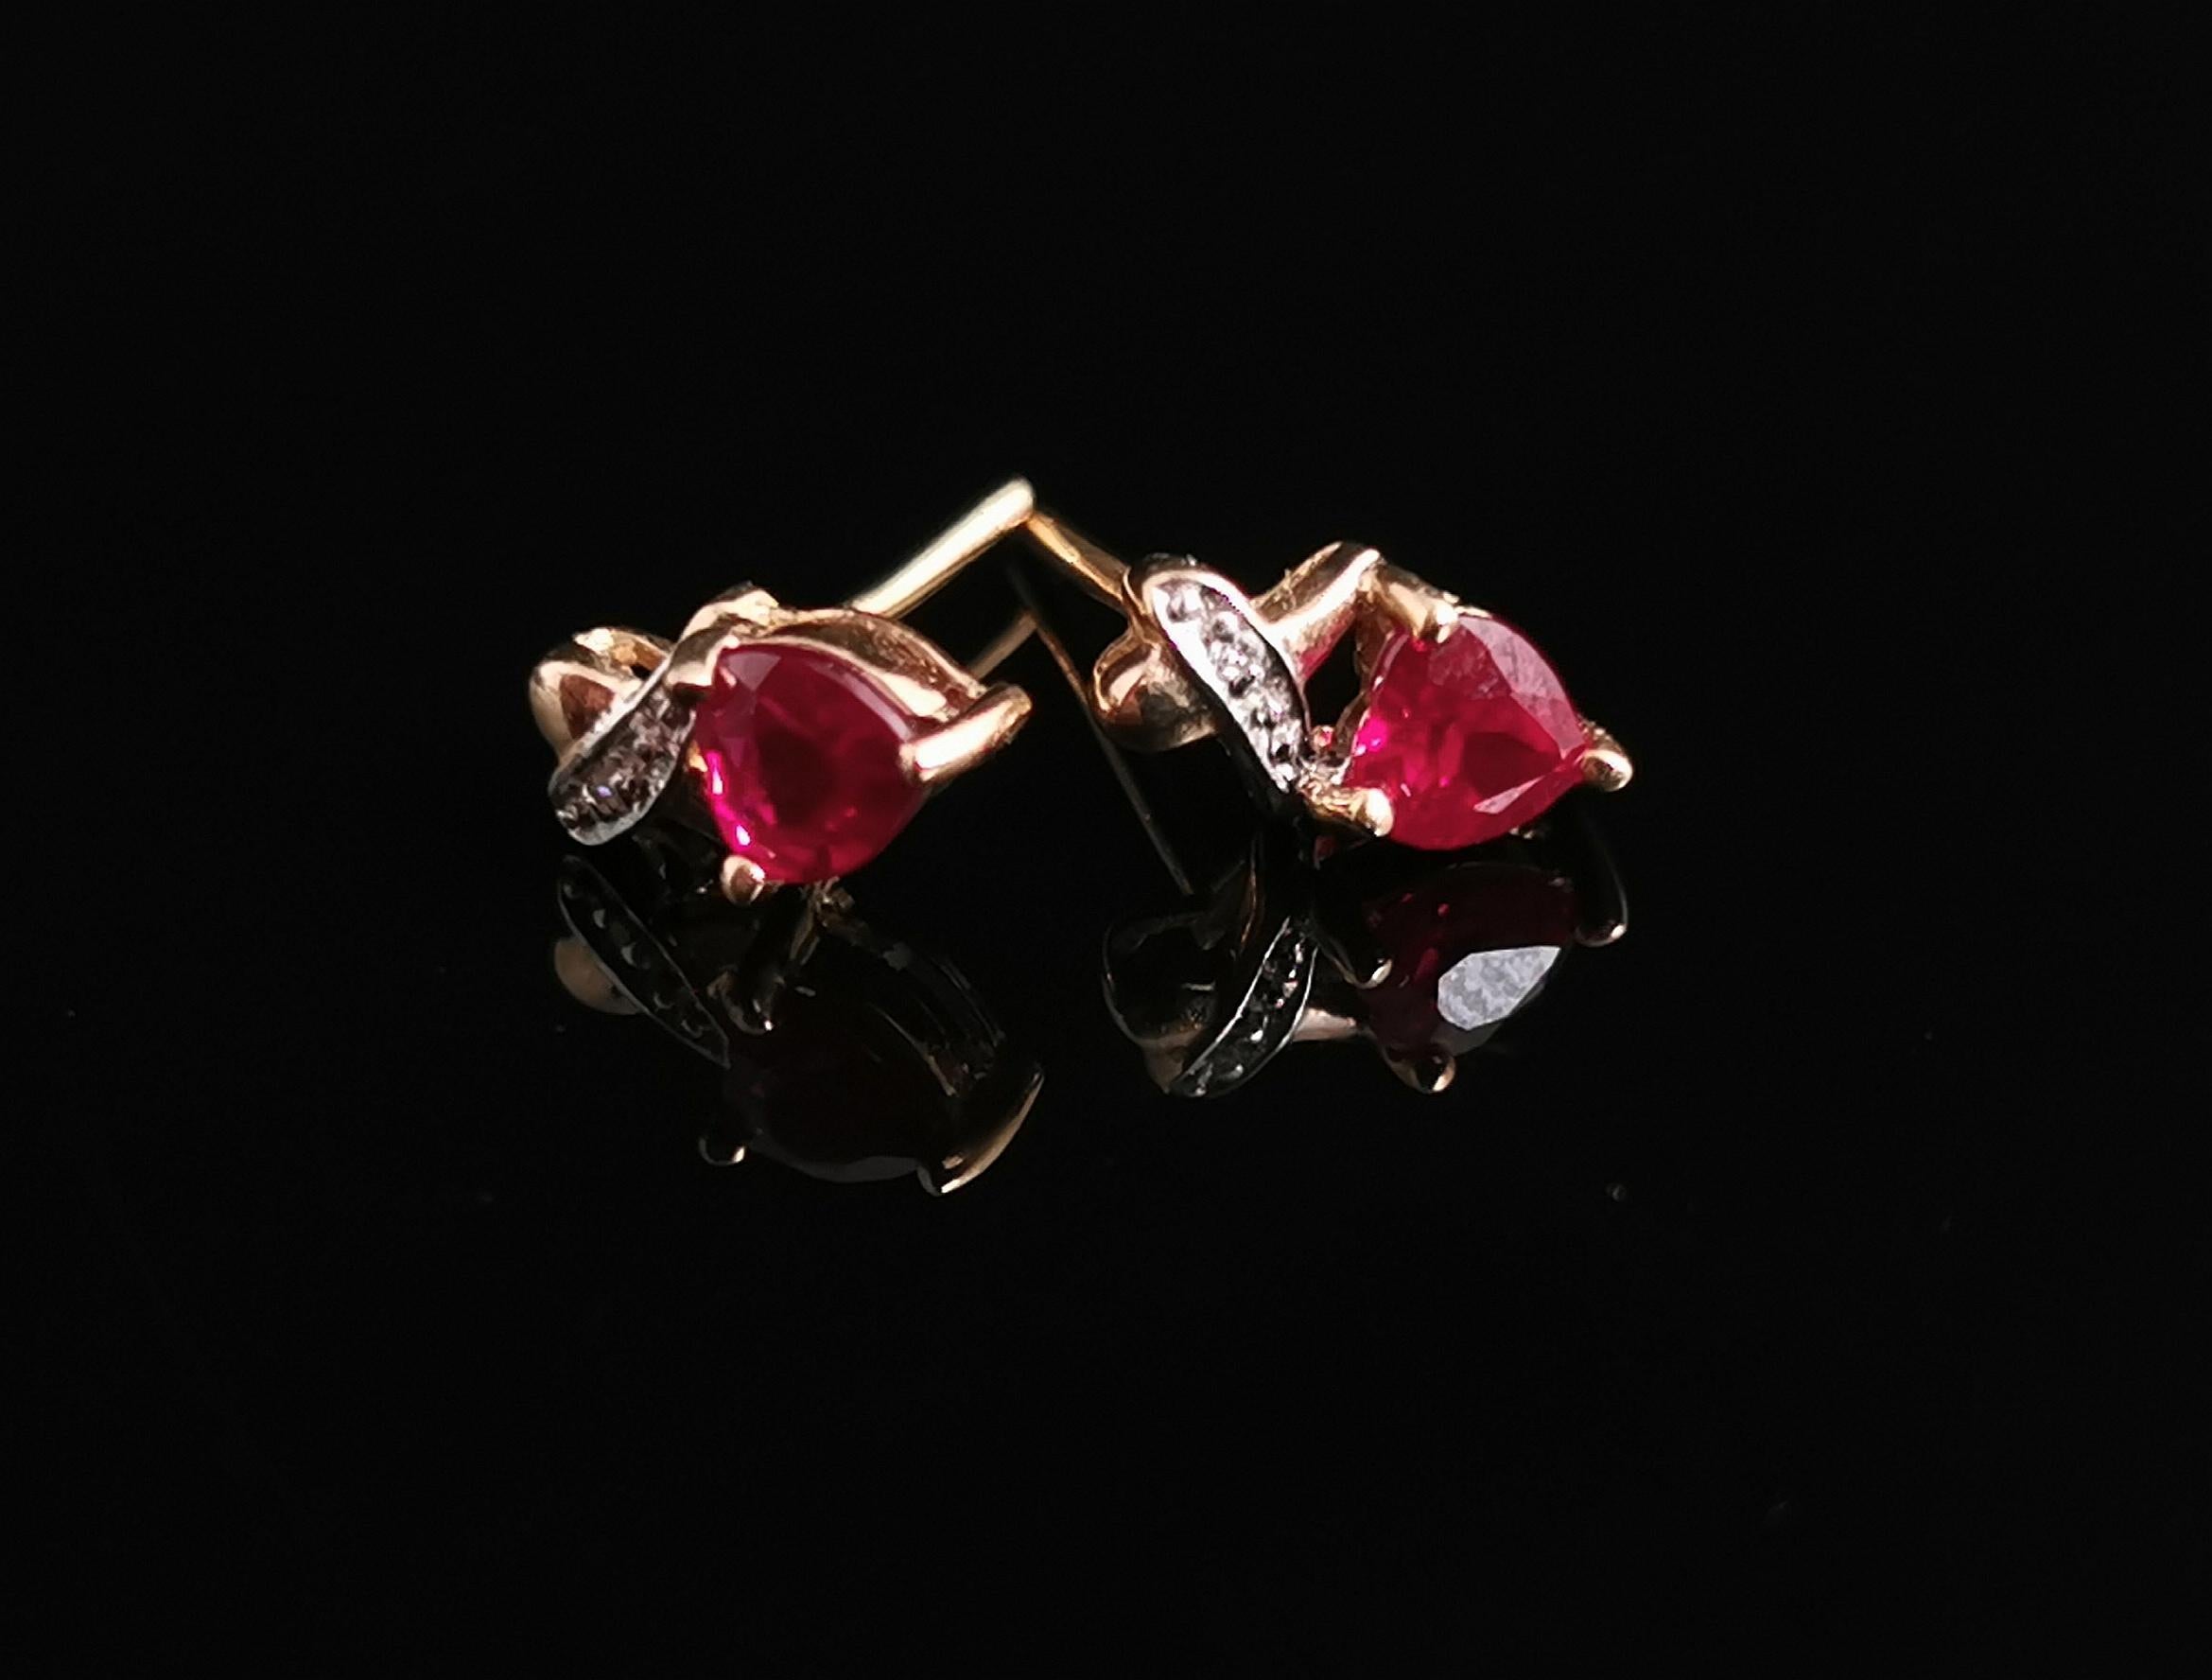 Vintage Synthetic Ruby and Diamond Heart Earrings, Studs, 9 Karat Gold  3